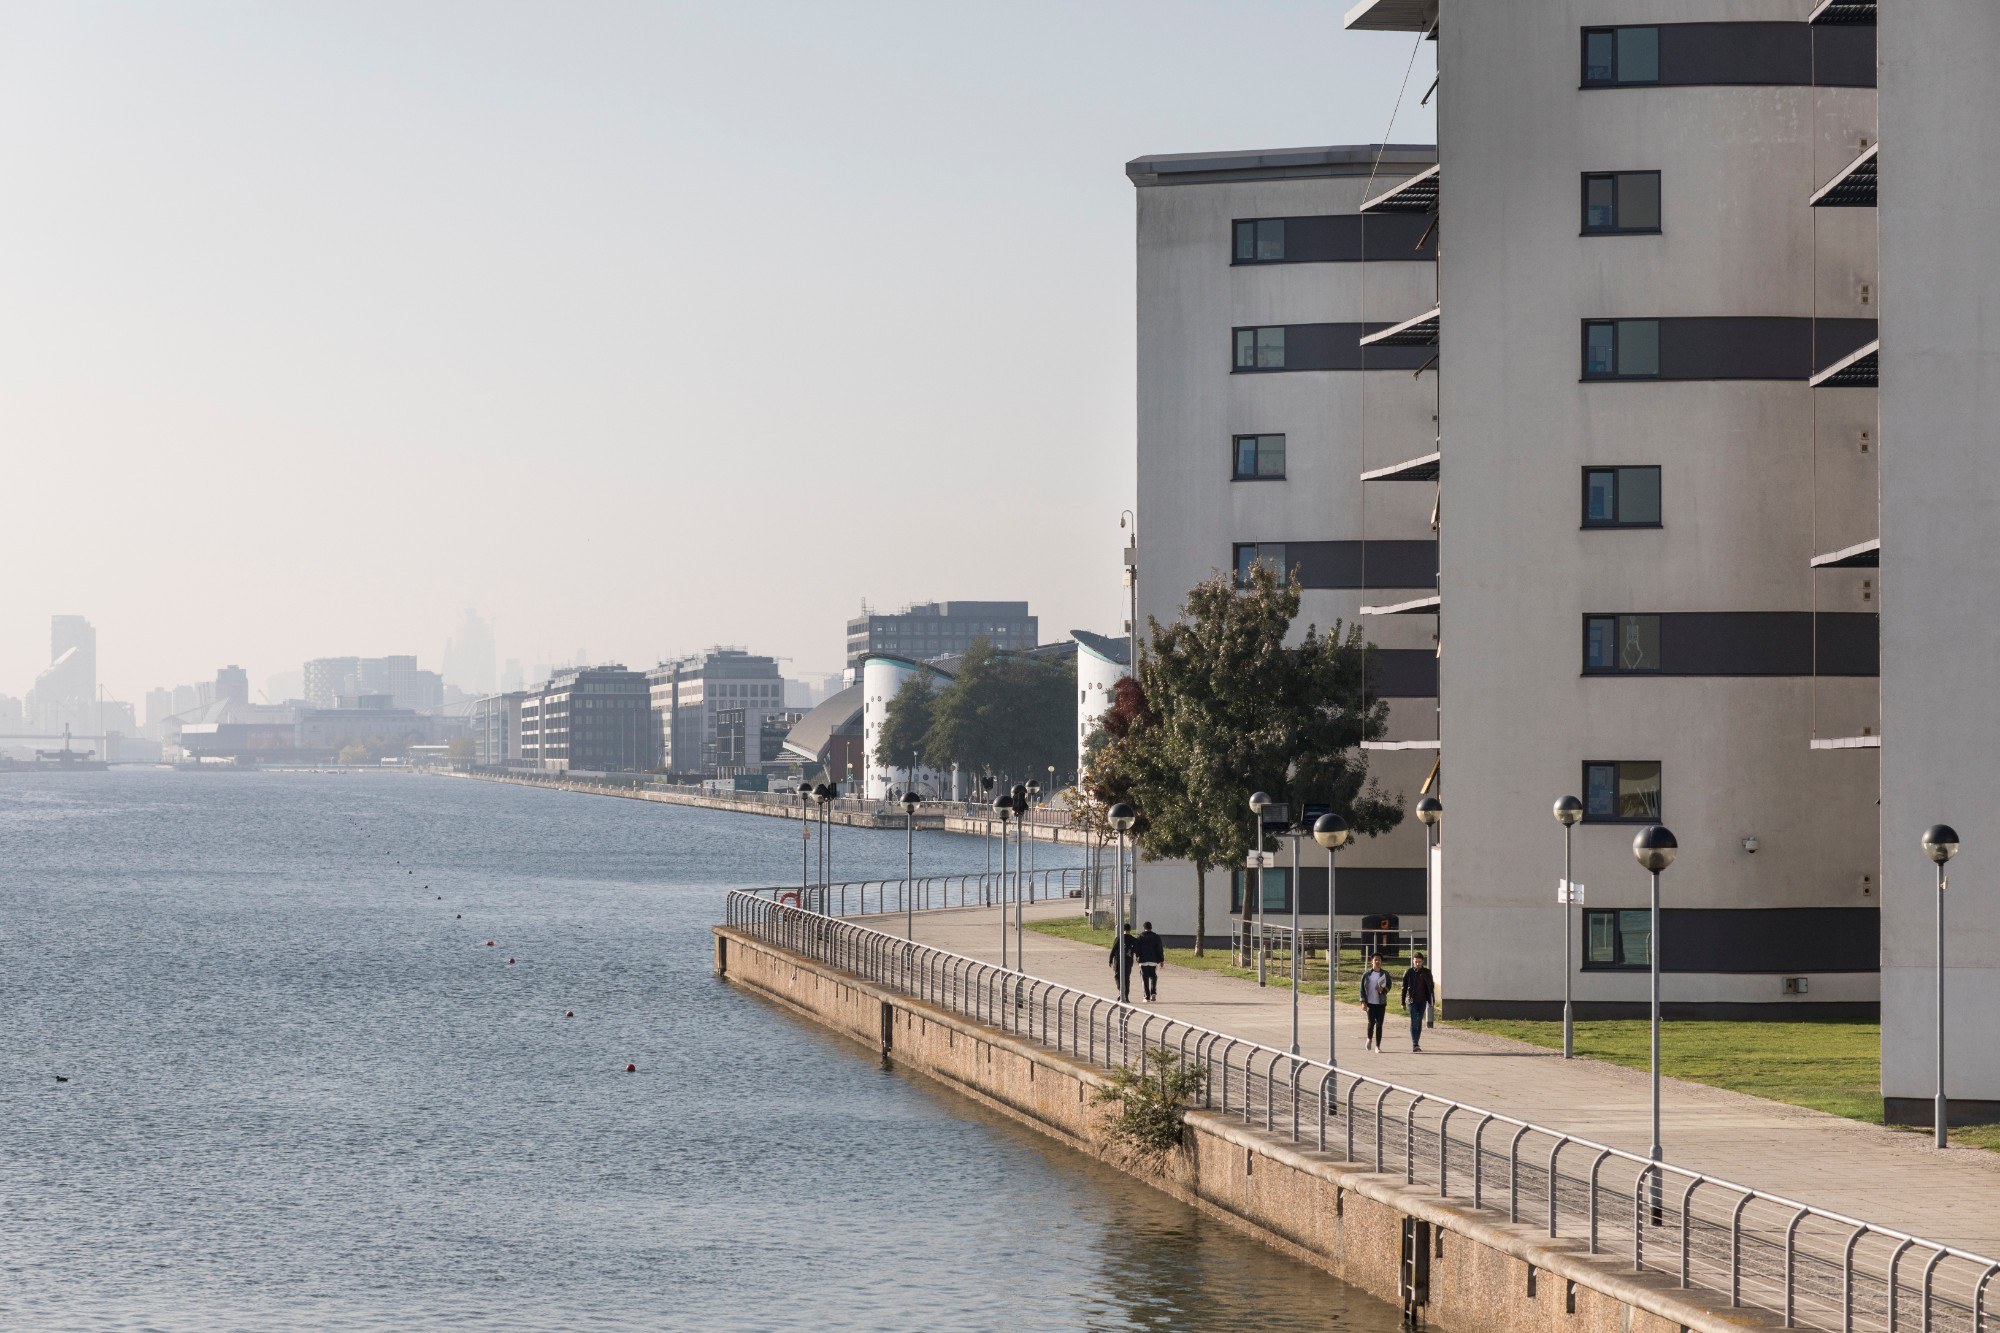 An image of University of East London from Redgrave Bridge overlooking the water